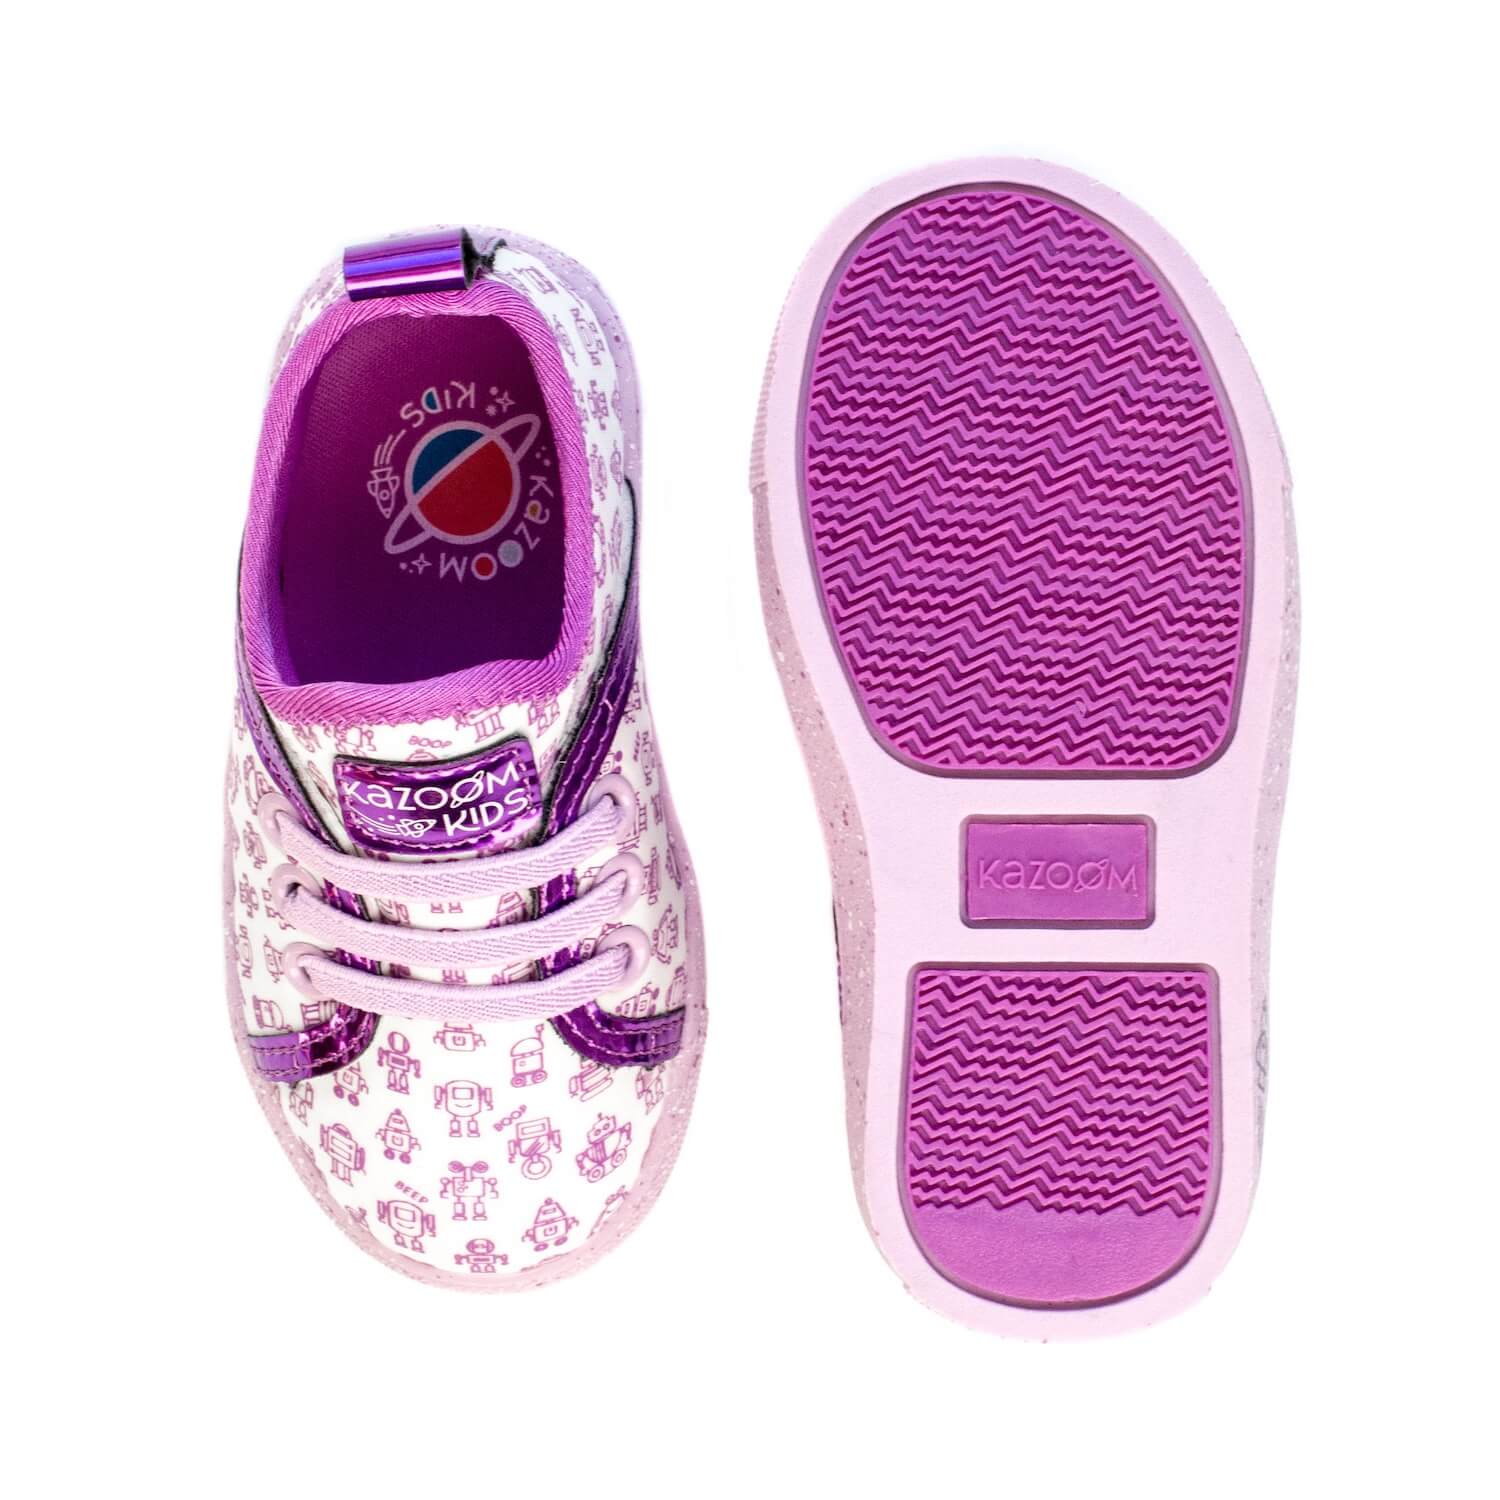 Purple and white Robot youth shoes with photo of bottom sole, no-tie laces, easy slip on, Available for Boys and Girls